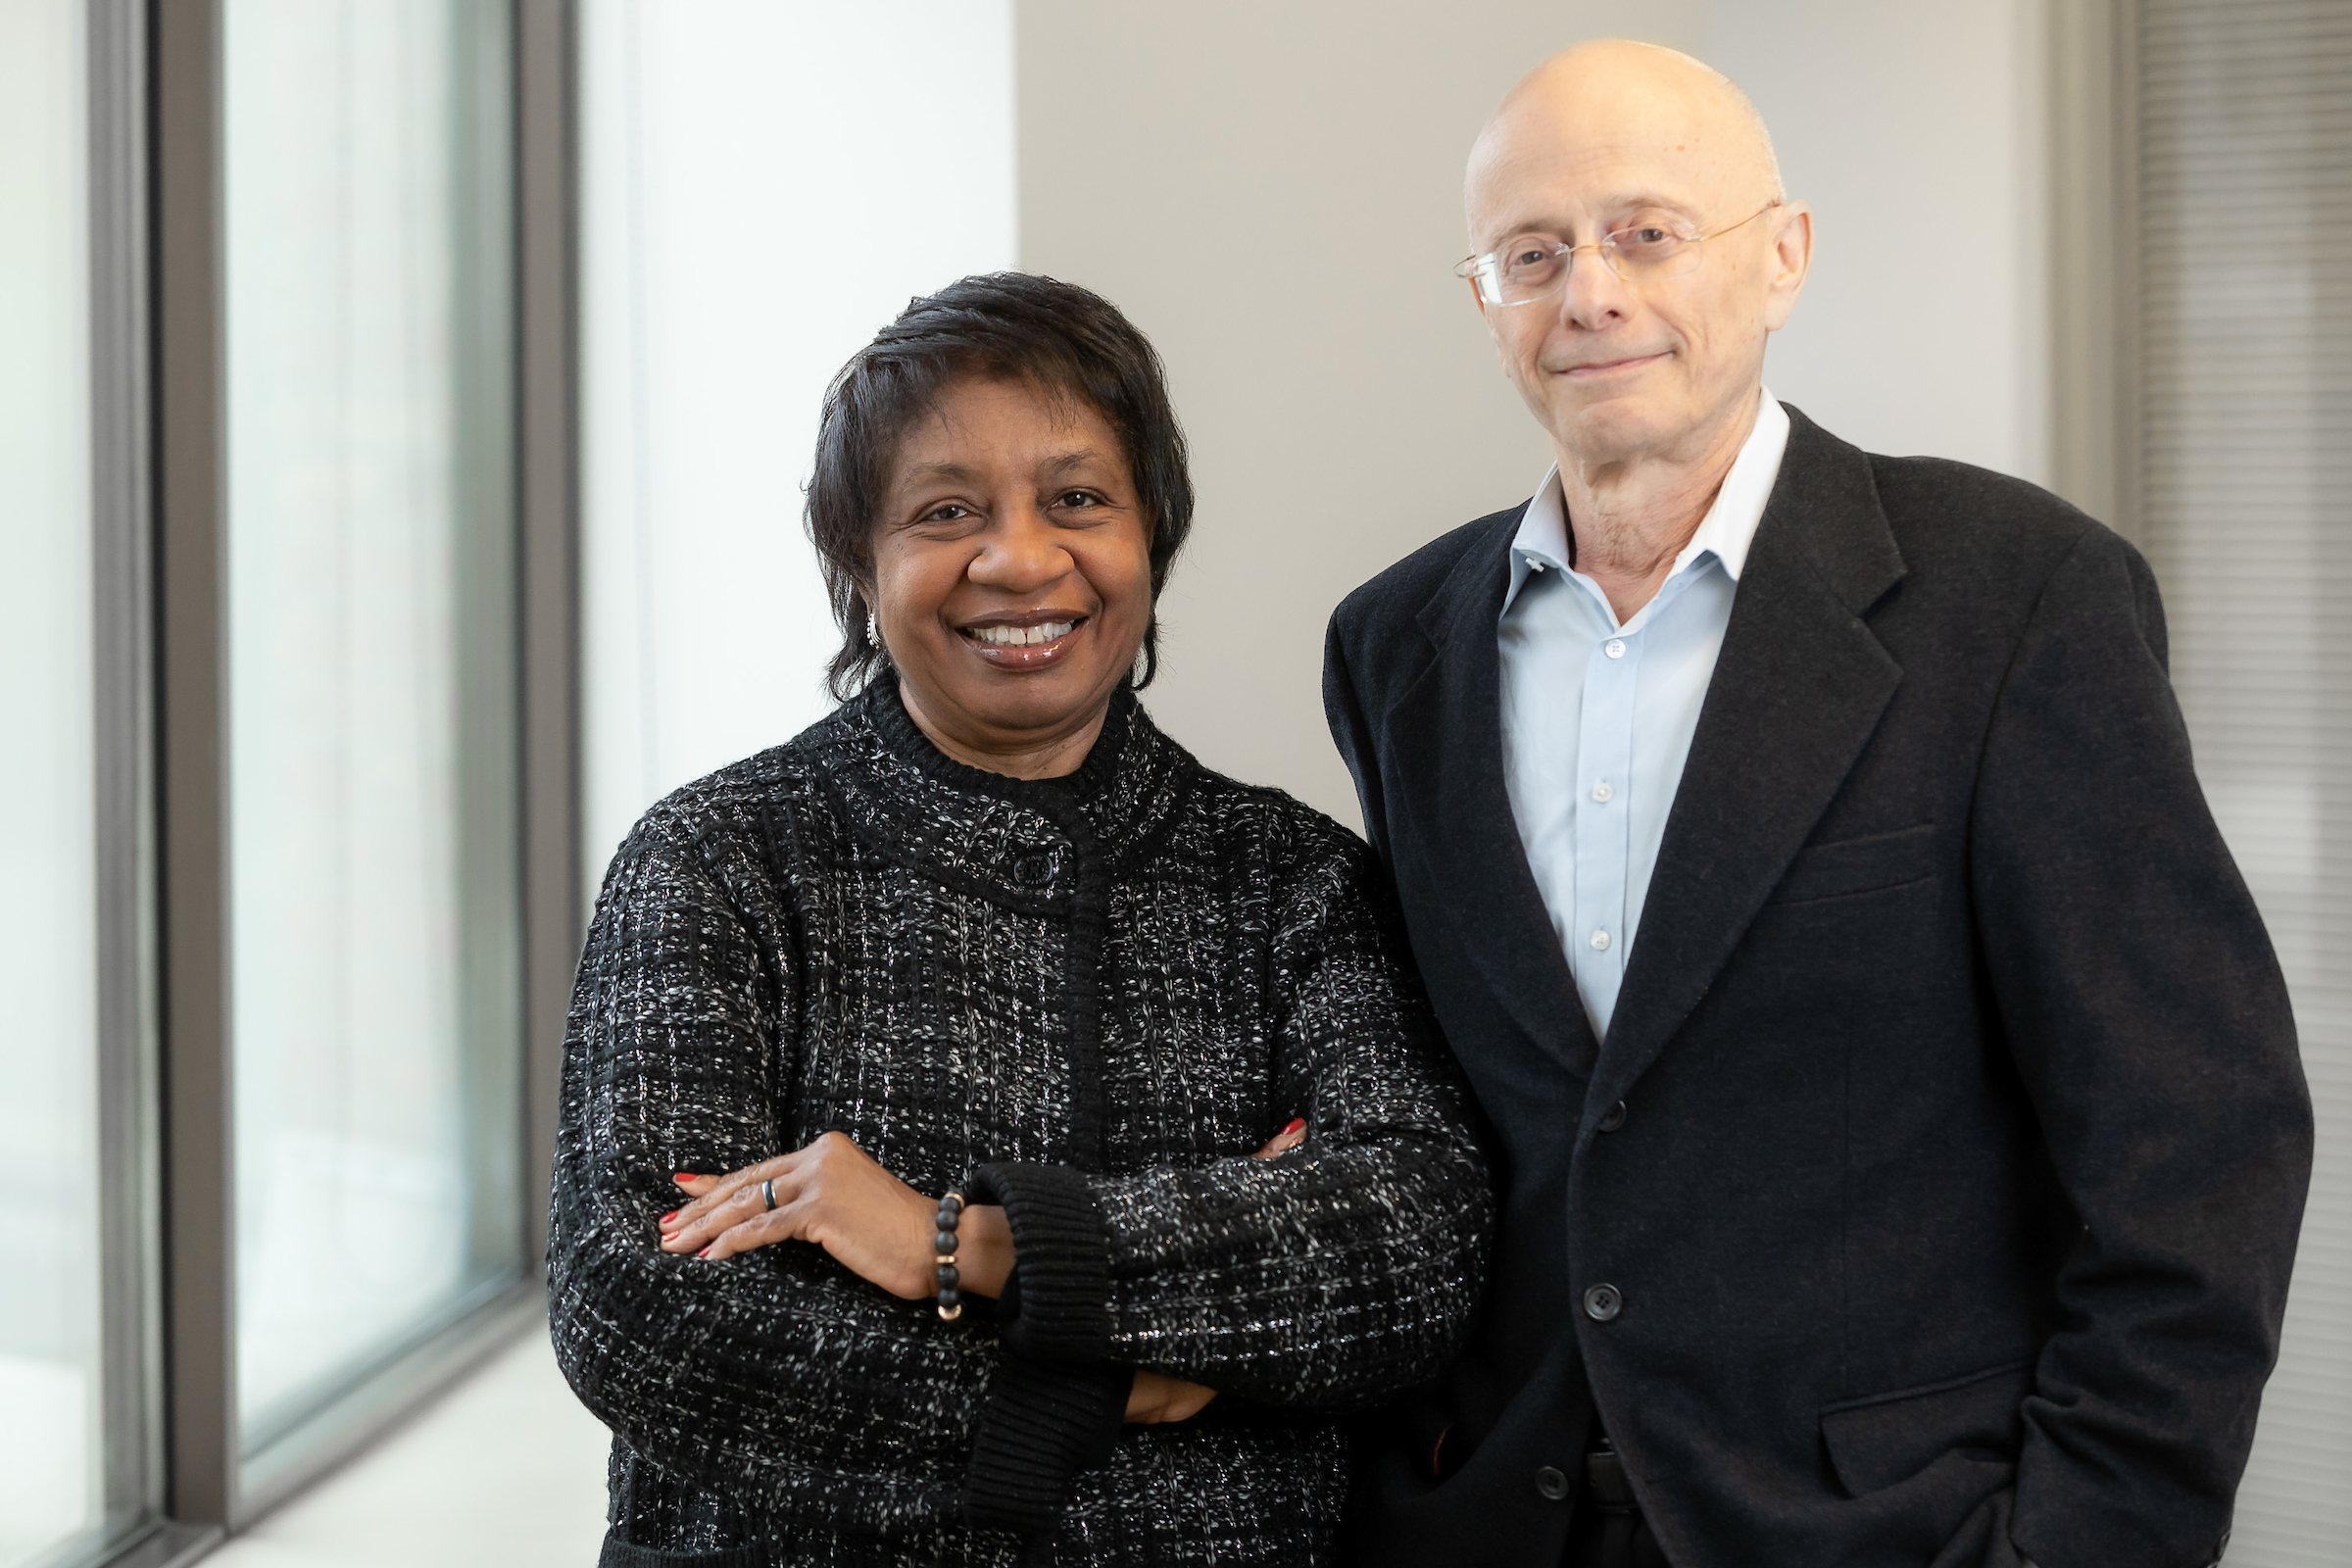 W. LaVome Robinson and Leonard A. Jason, professors of psychology in the College of Science and Health, have received a $6.6 million grant to fund research to reduce African American youth violence. (DePaul University/Jeff Carrion)